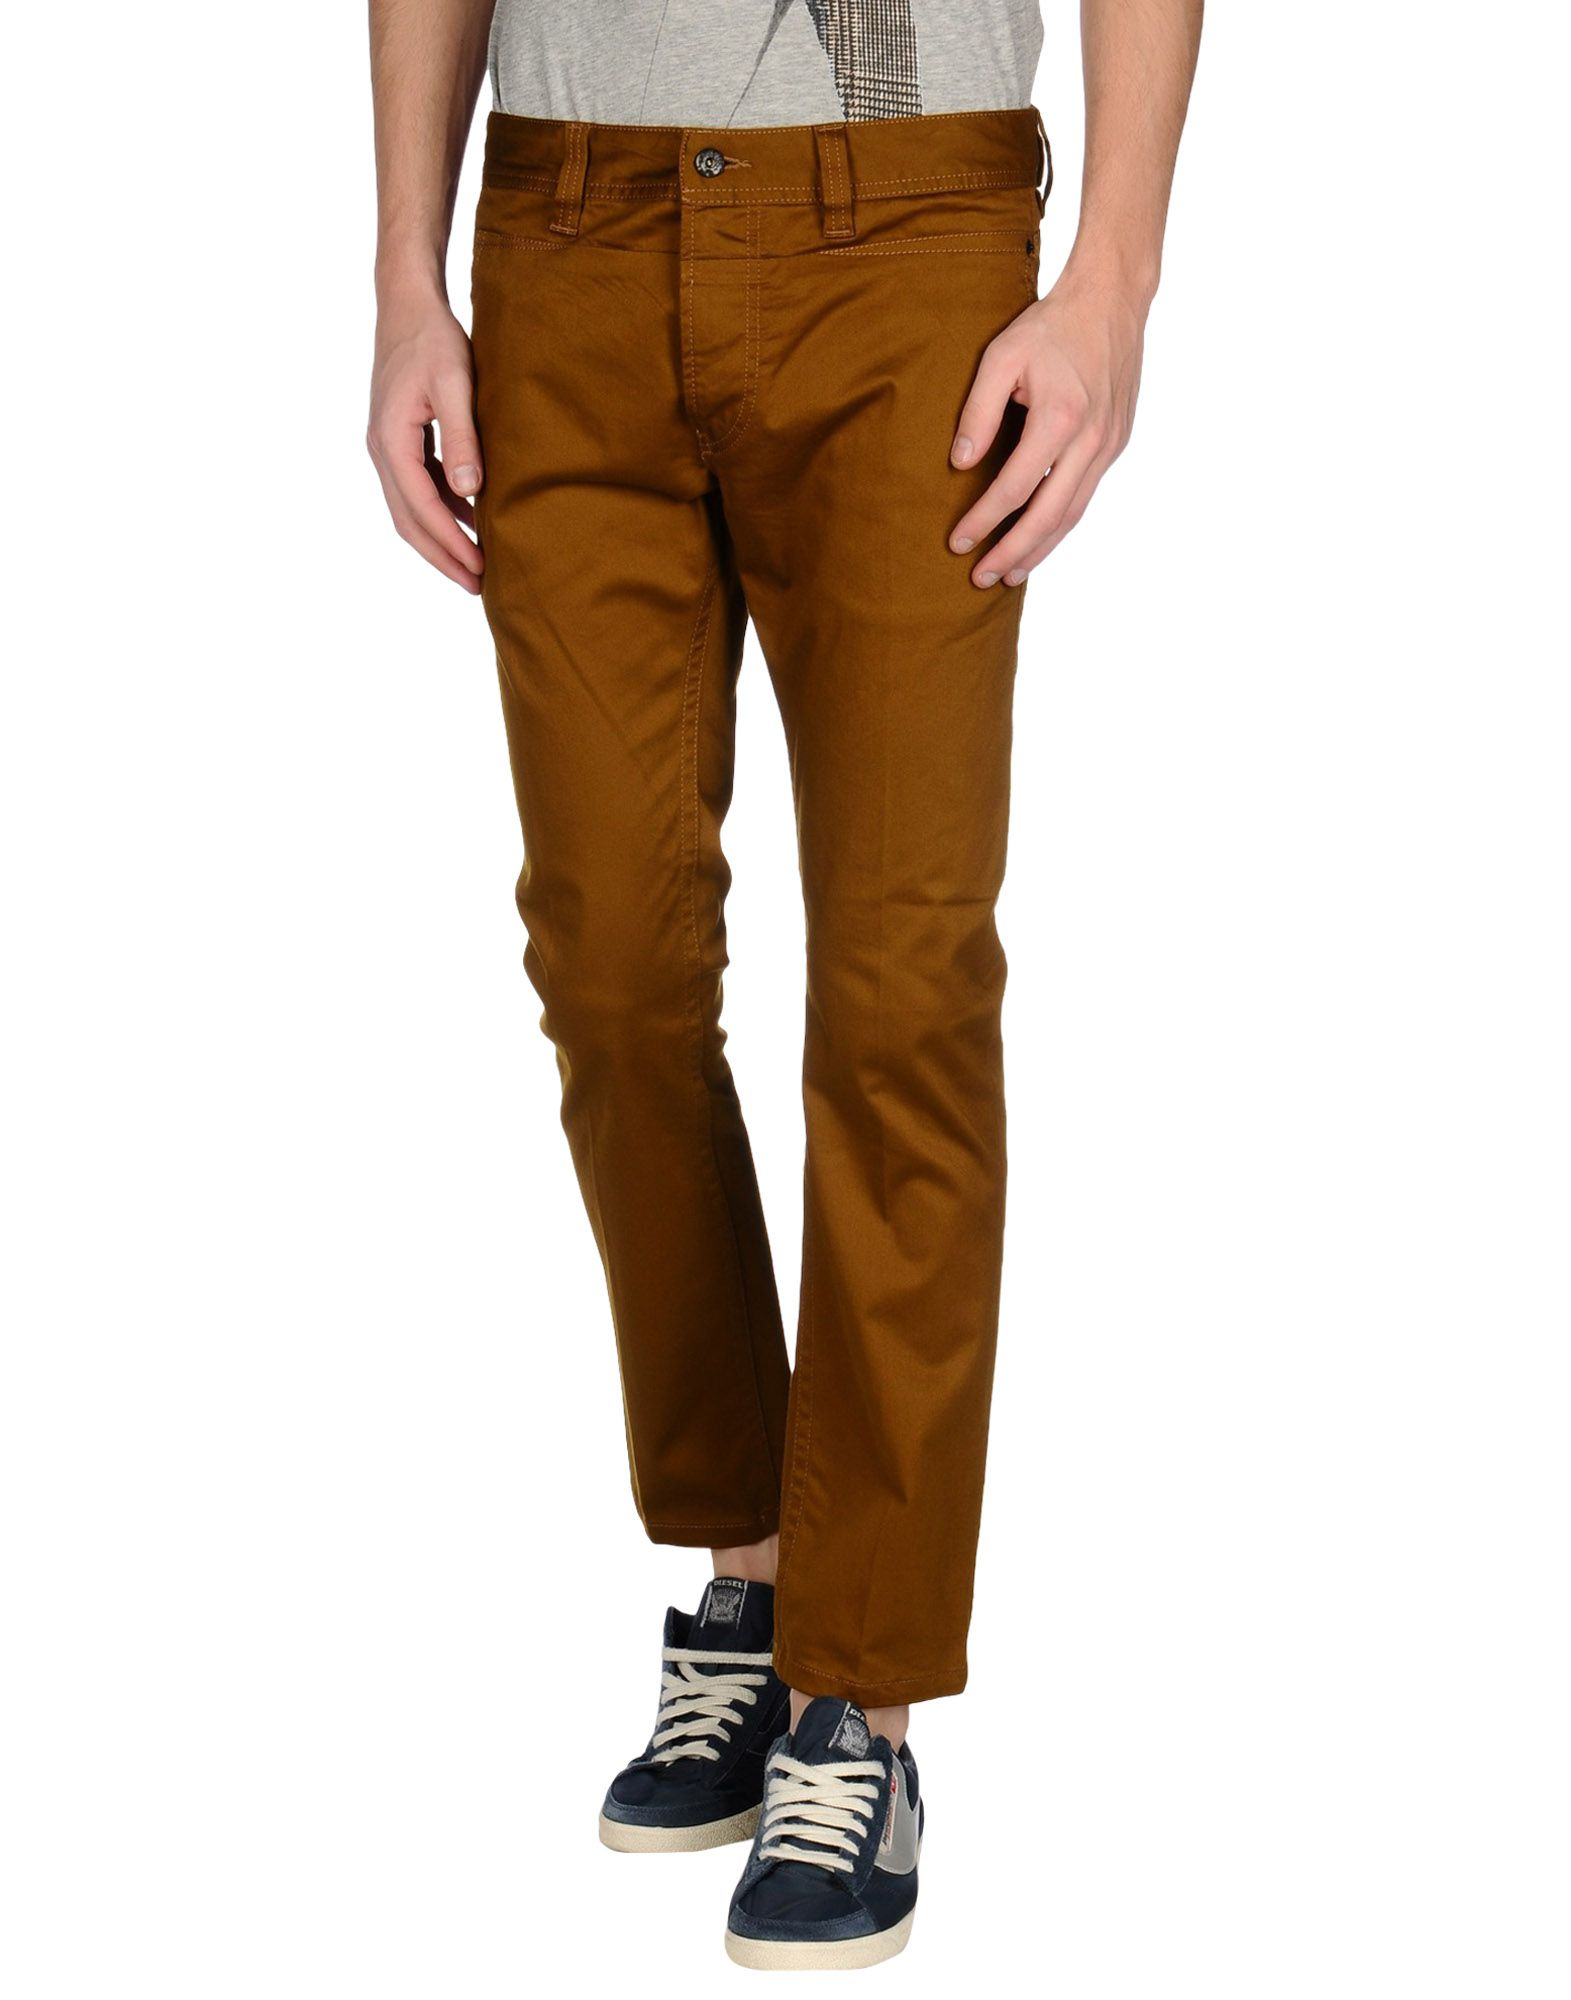 Diesel Casual Trouser in Natural for Men (Khaki) - Save 50% | Lyst